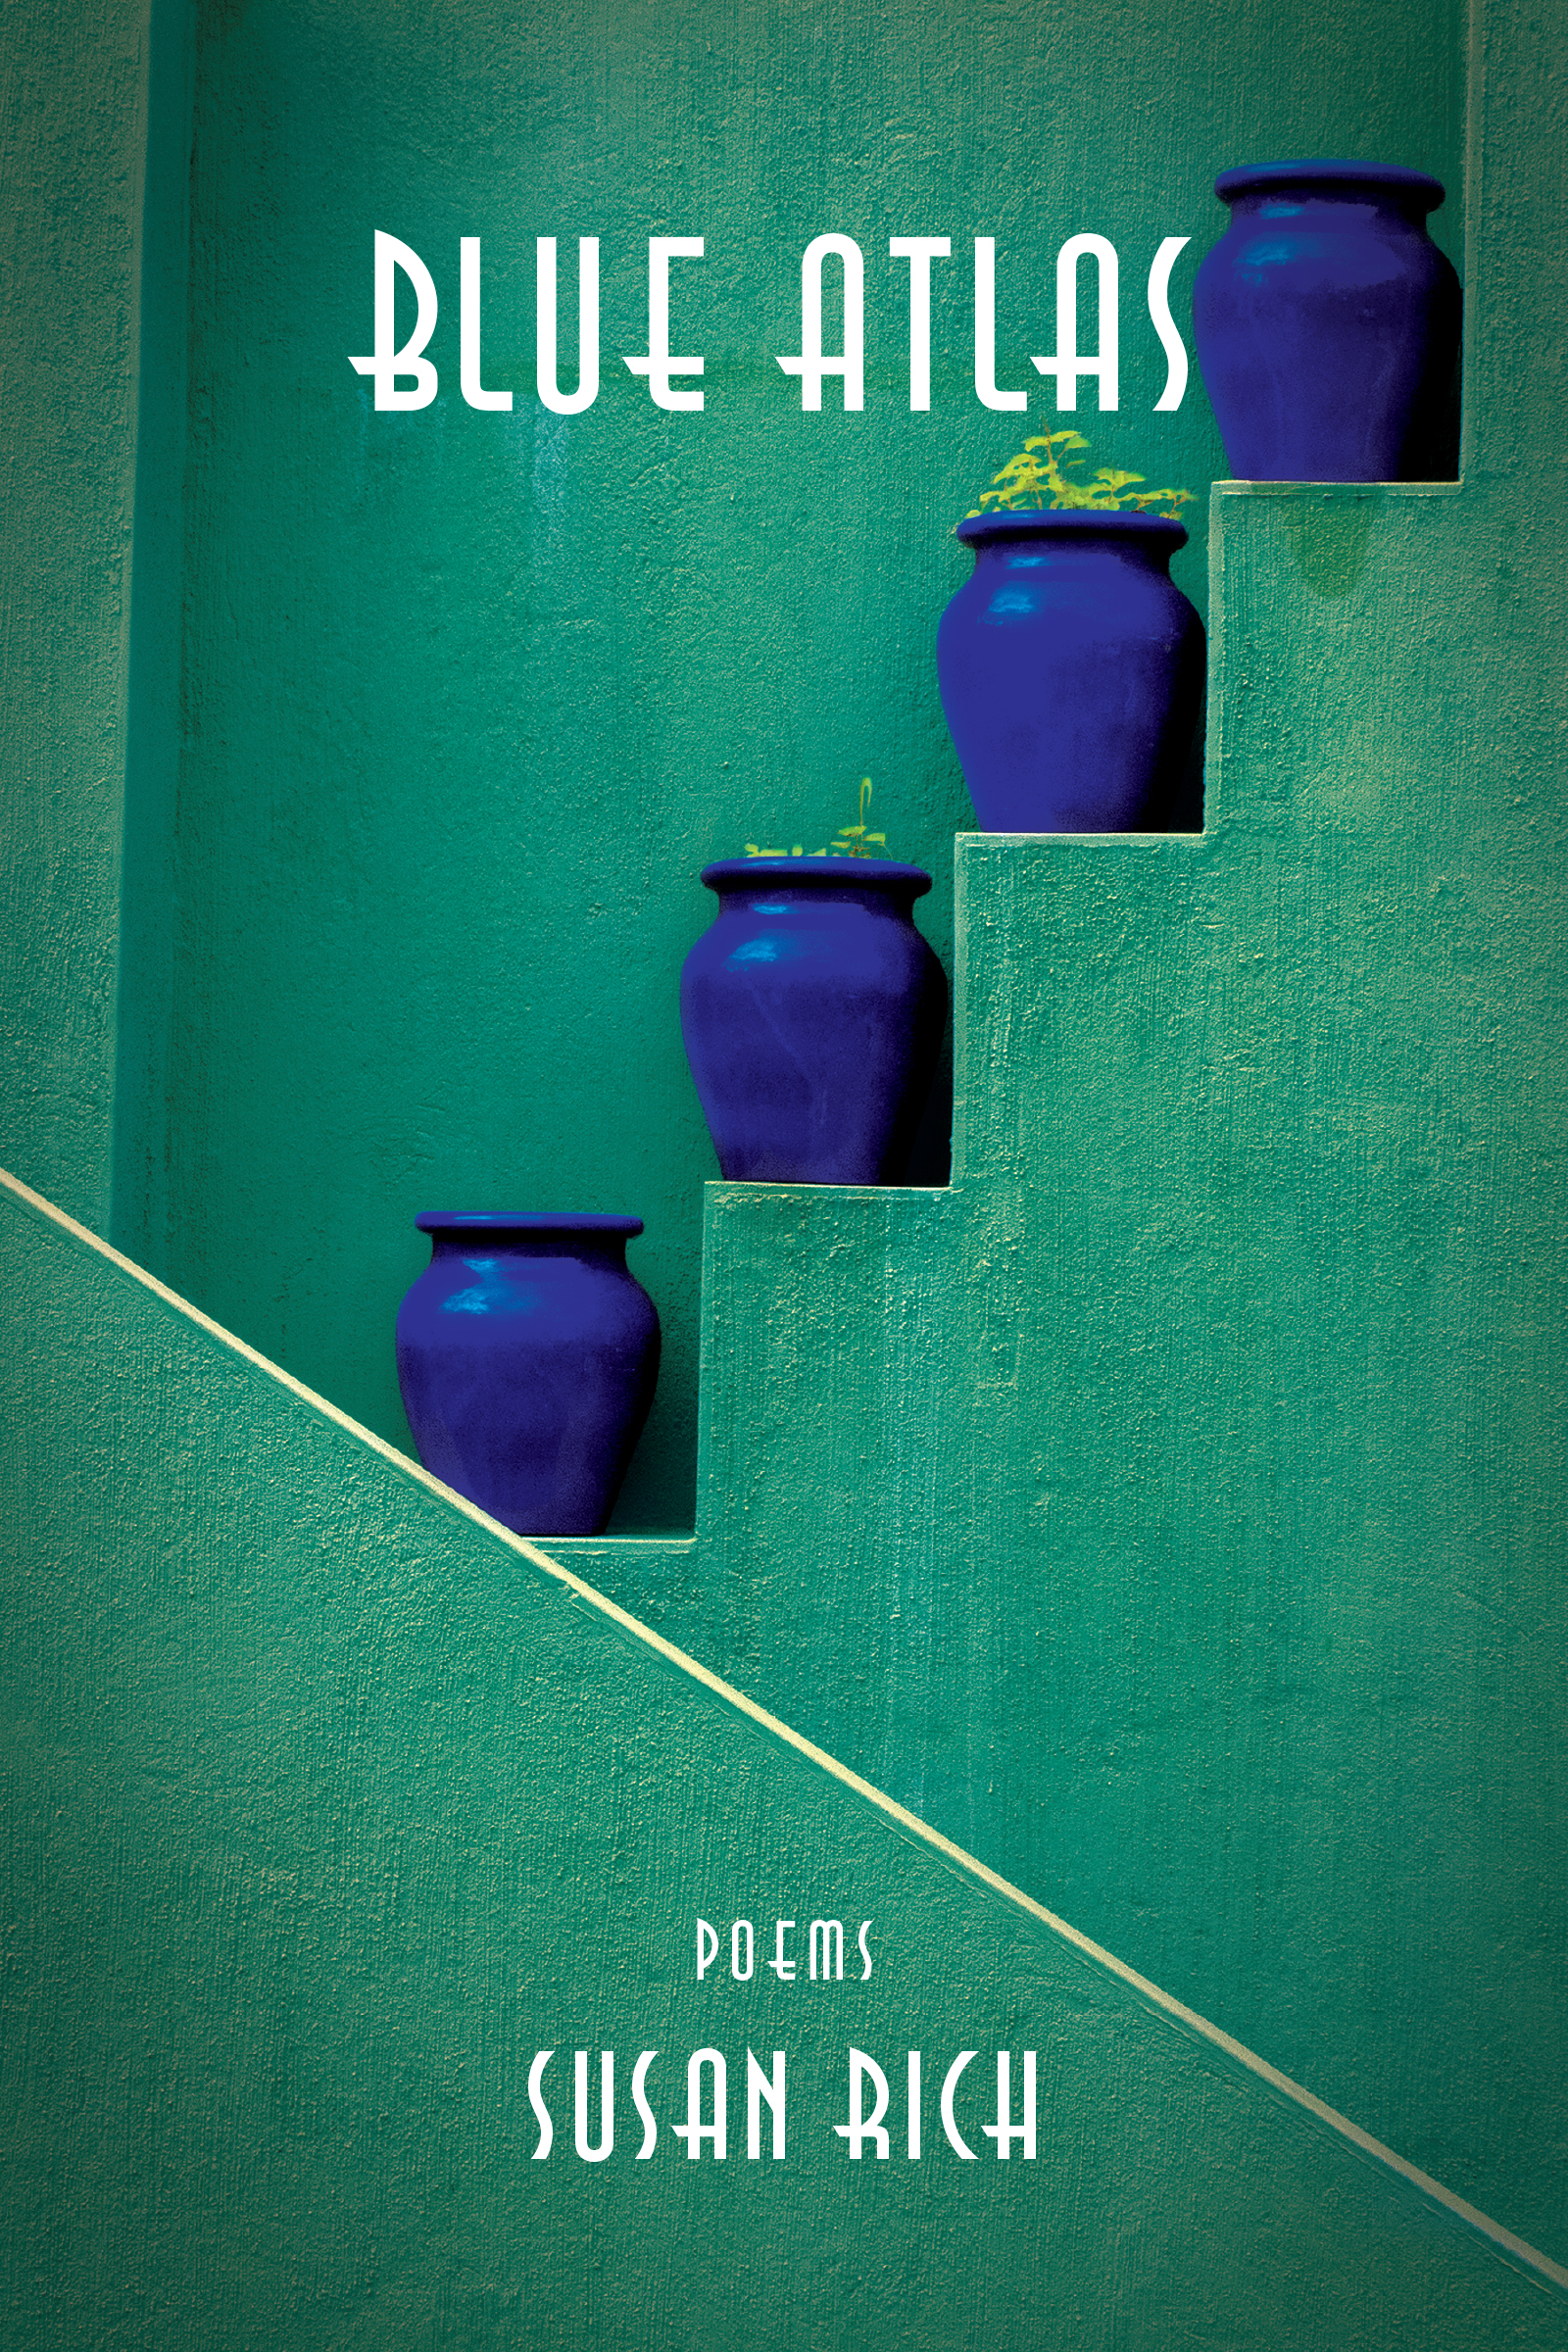 A photograph of acure jars on inclining steps of a teal mediterranean green background with white text reading "Blue Atlas, Poems, Susan Rich"